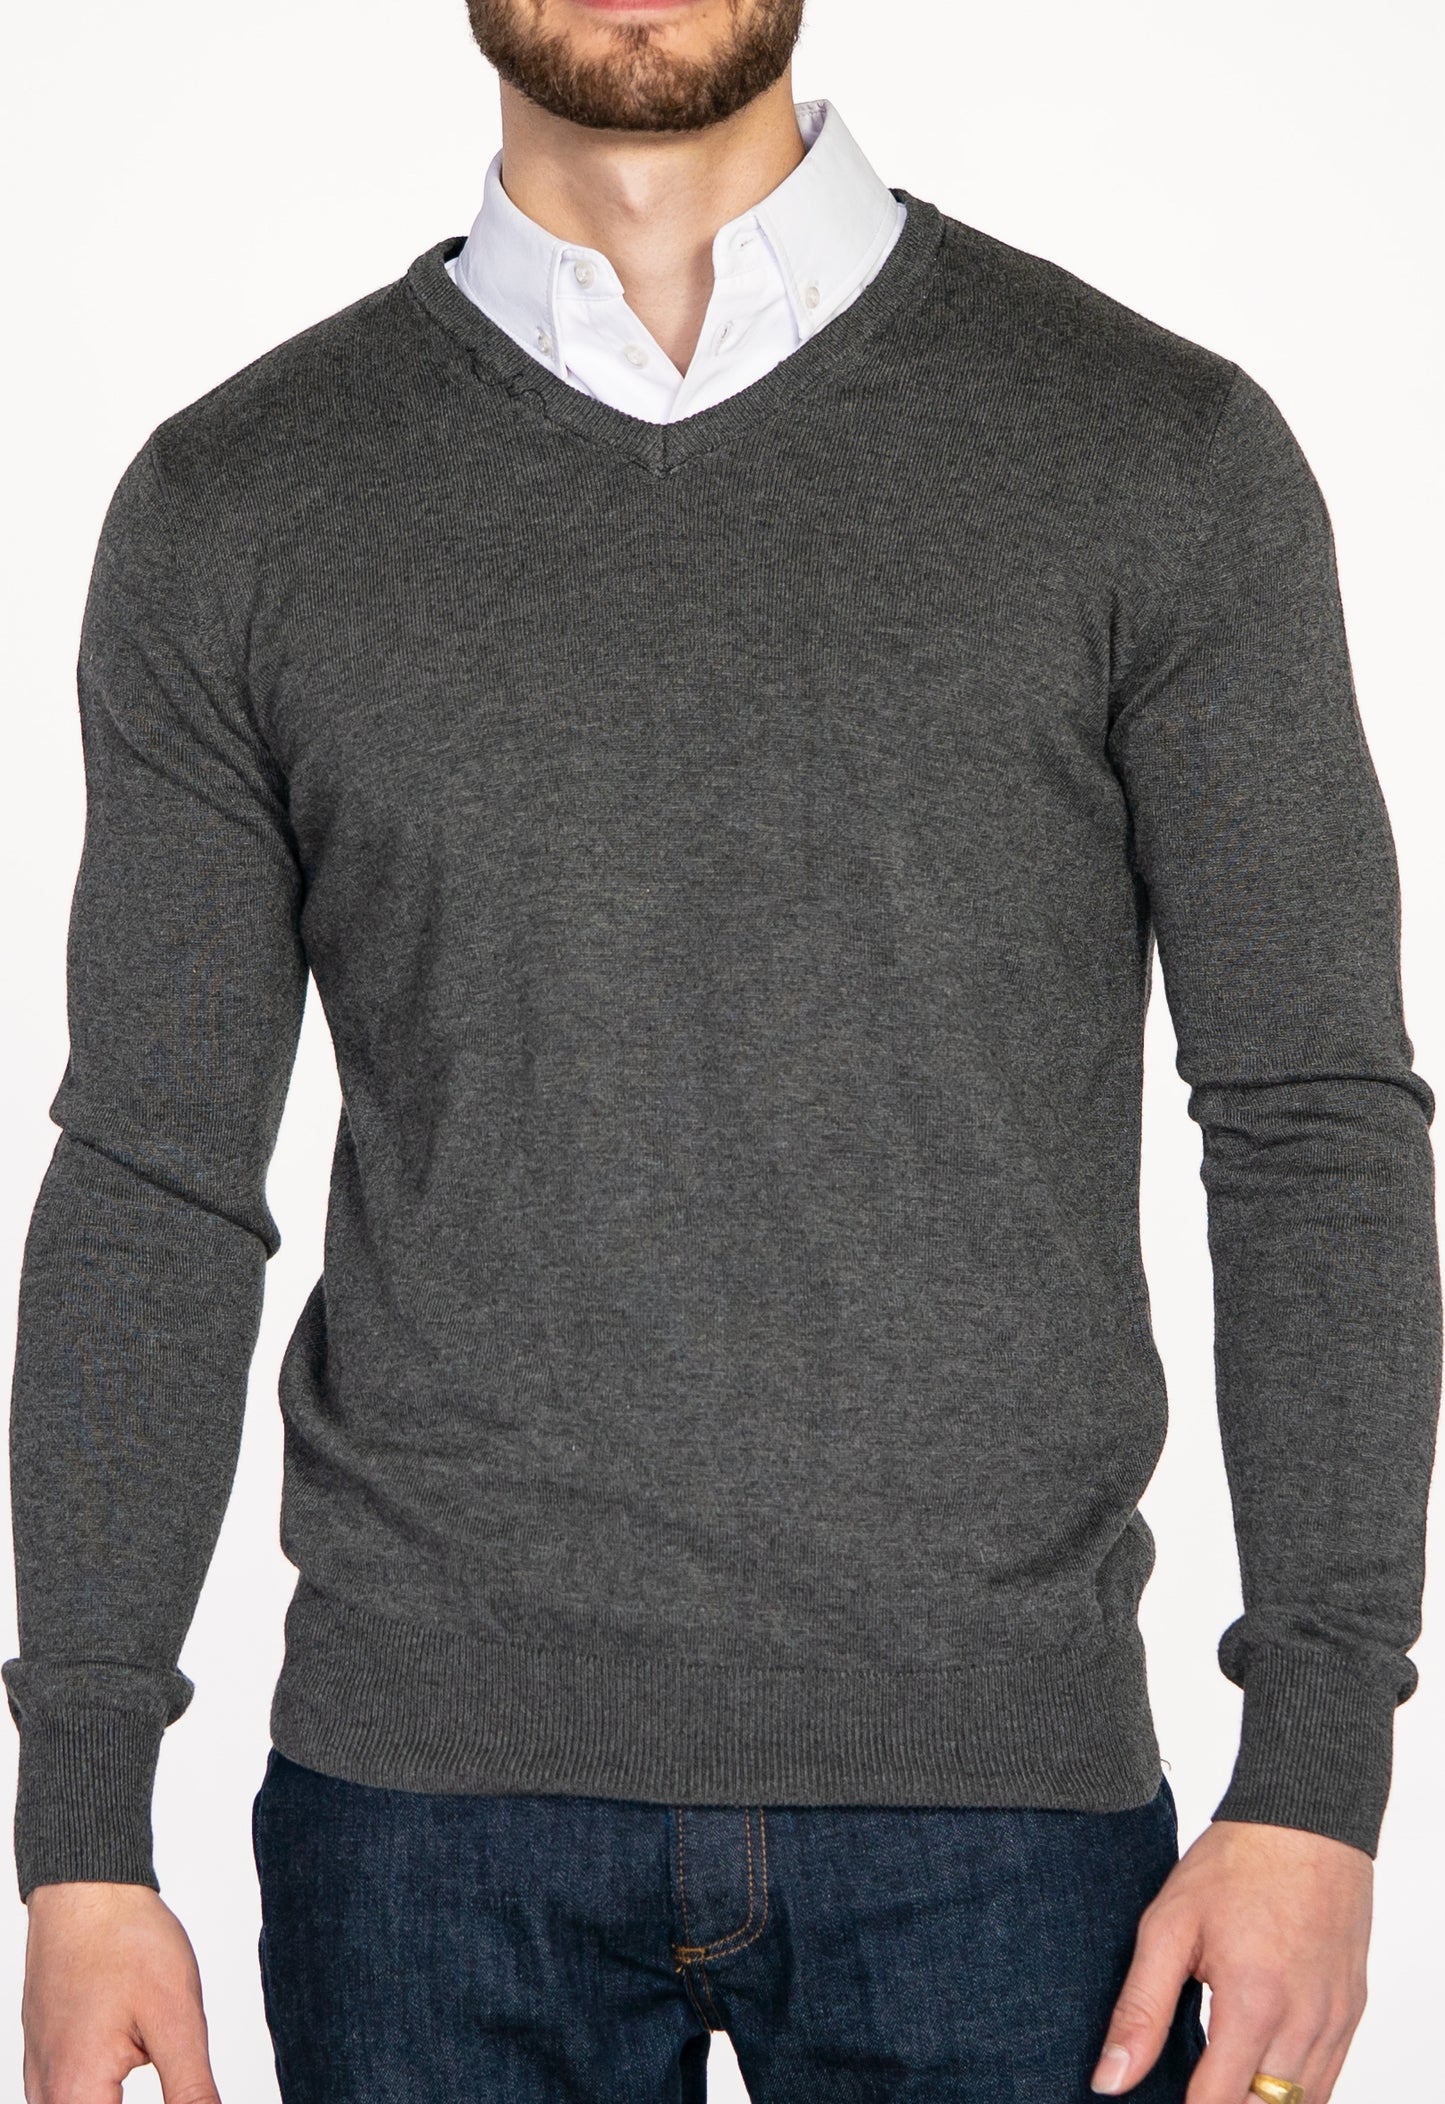 Charcoal Sweater with White Collared Shirt